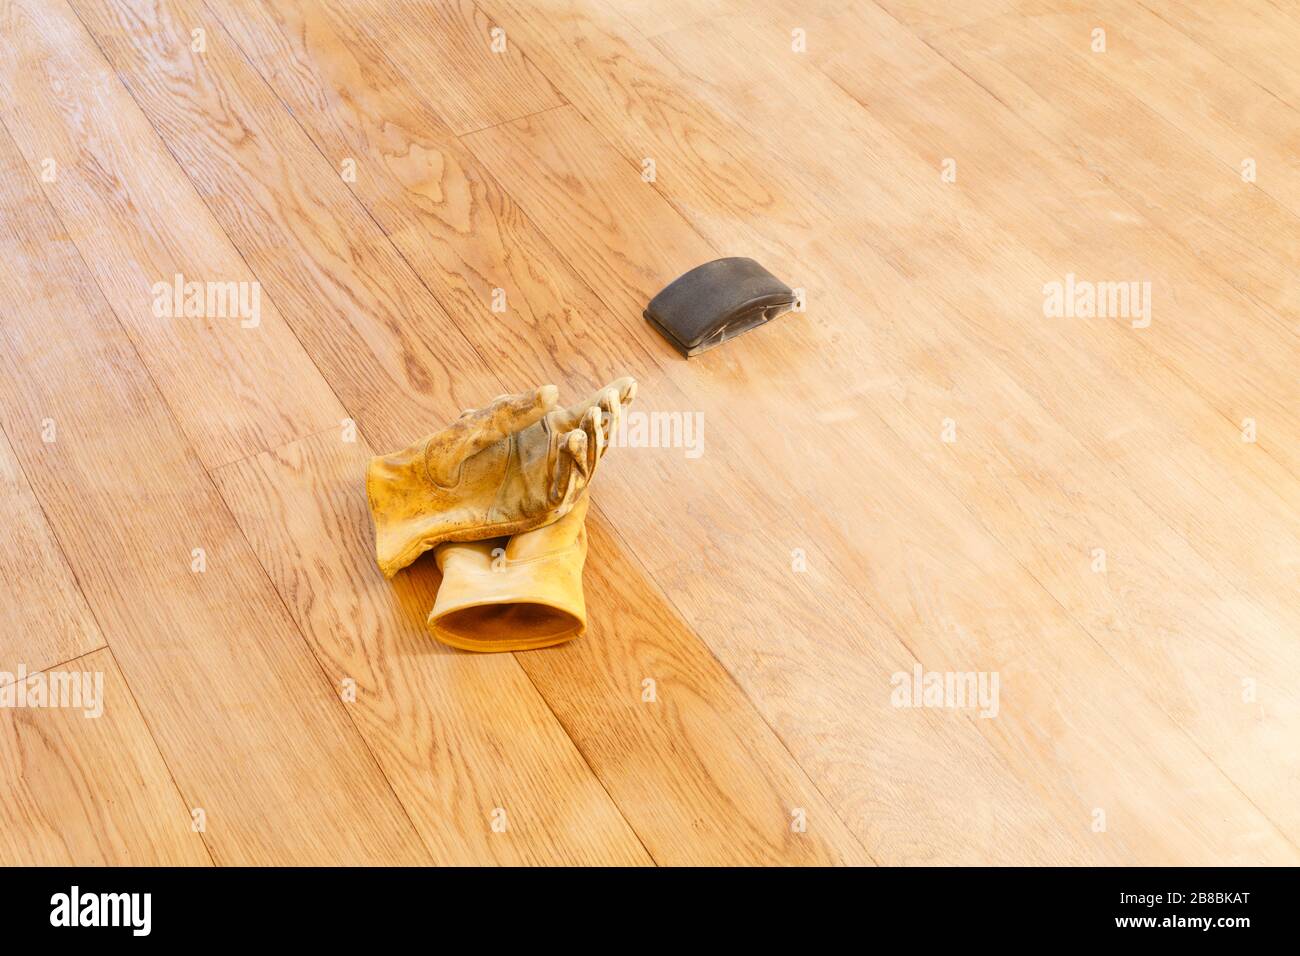 Sanding A Floor With A Sanding Block Home Improvement Diy Project Uk Stock Photo Alamy,How To Cook Ribs On A Gas Grill Easy